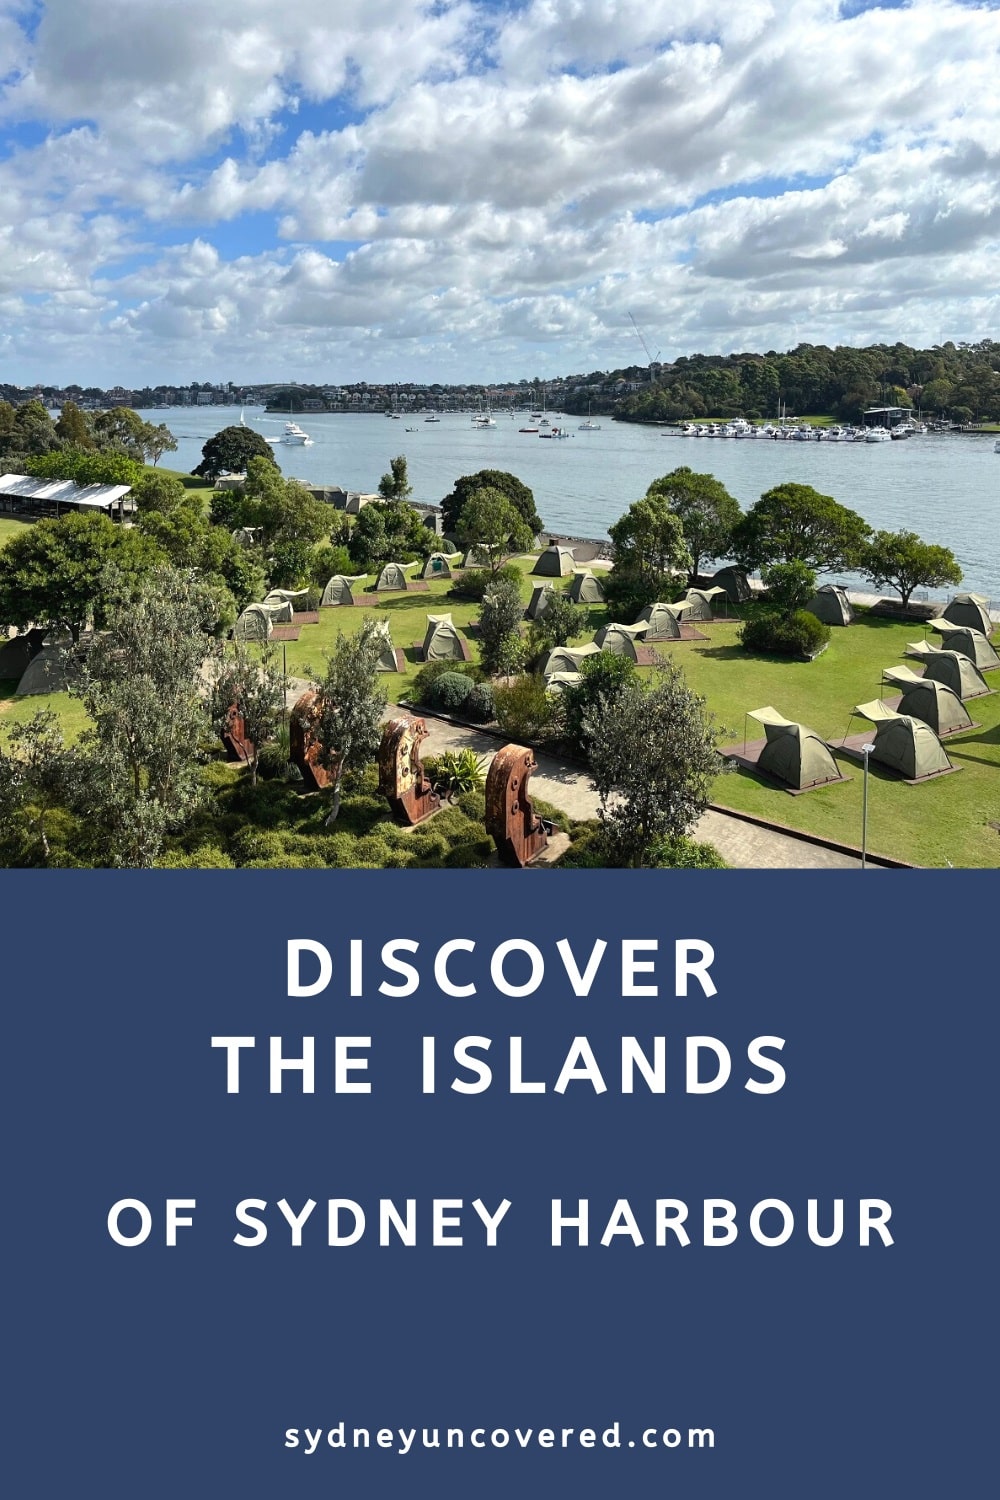 Discover the islands of Sydney Harbour